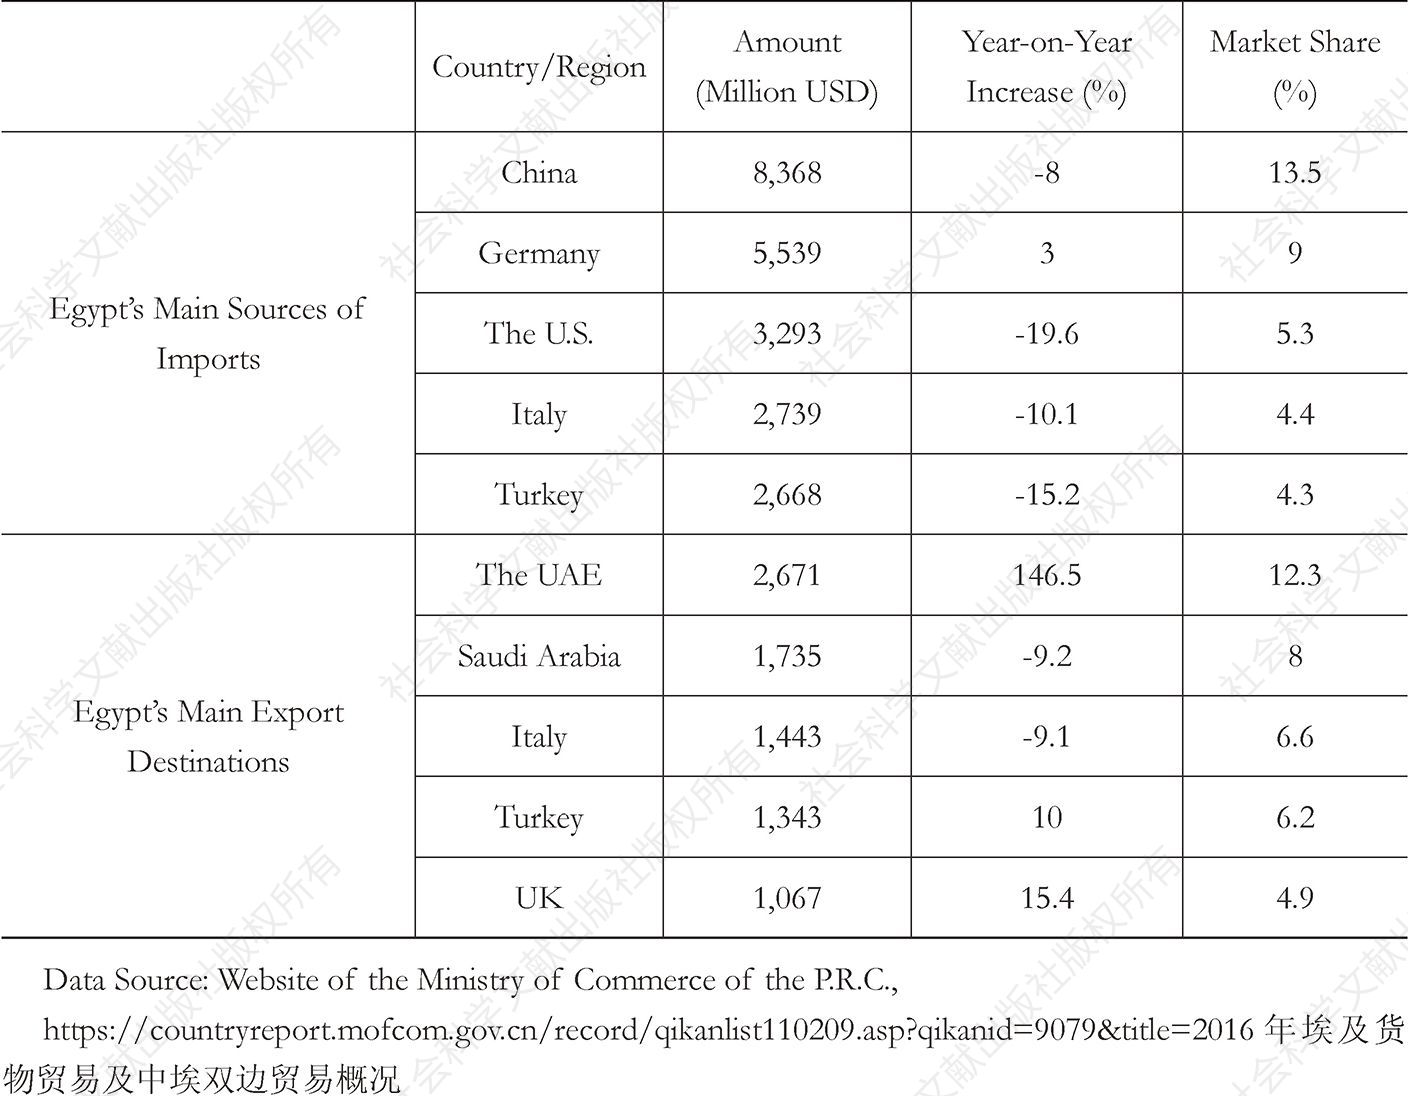 Table 3.13 Main Import and Export Trading Partners of Egypt in 2016 (Million USD)